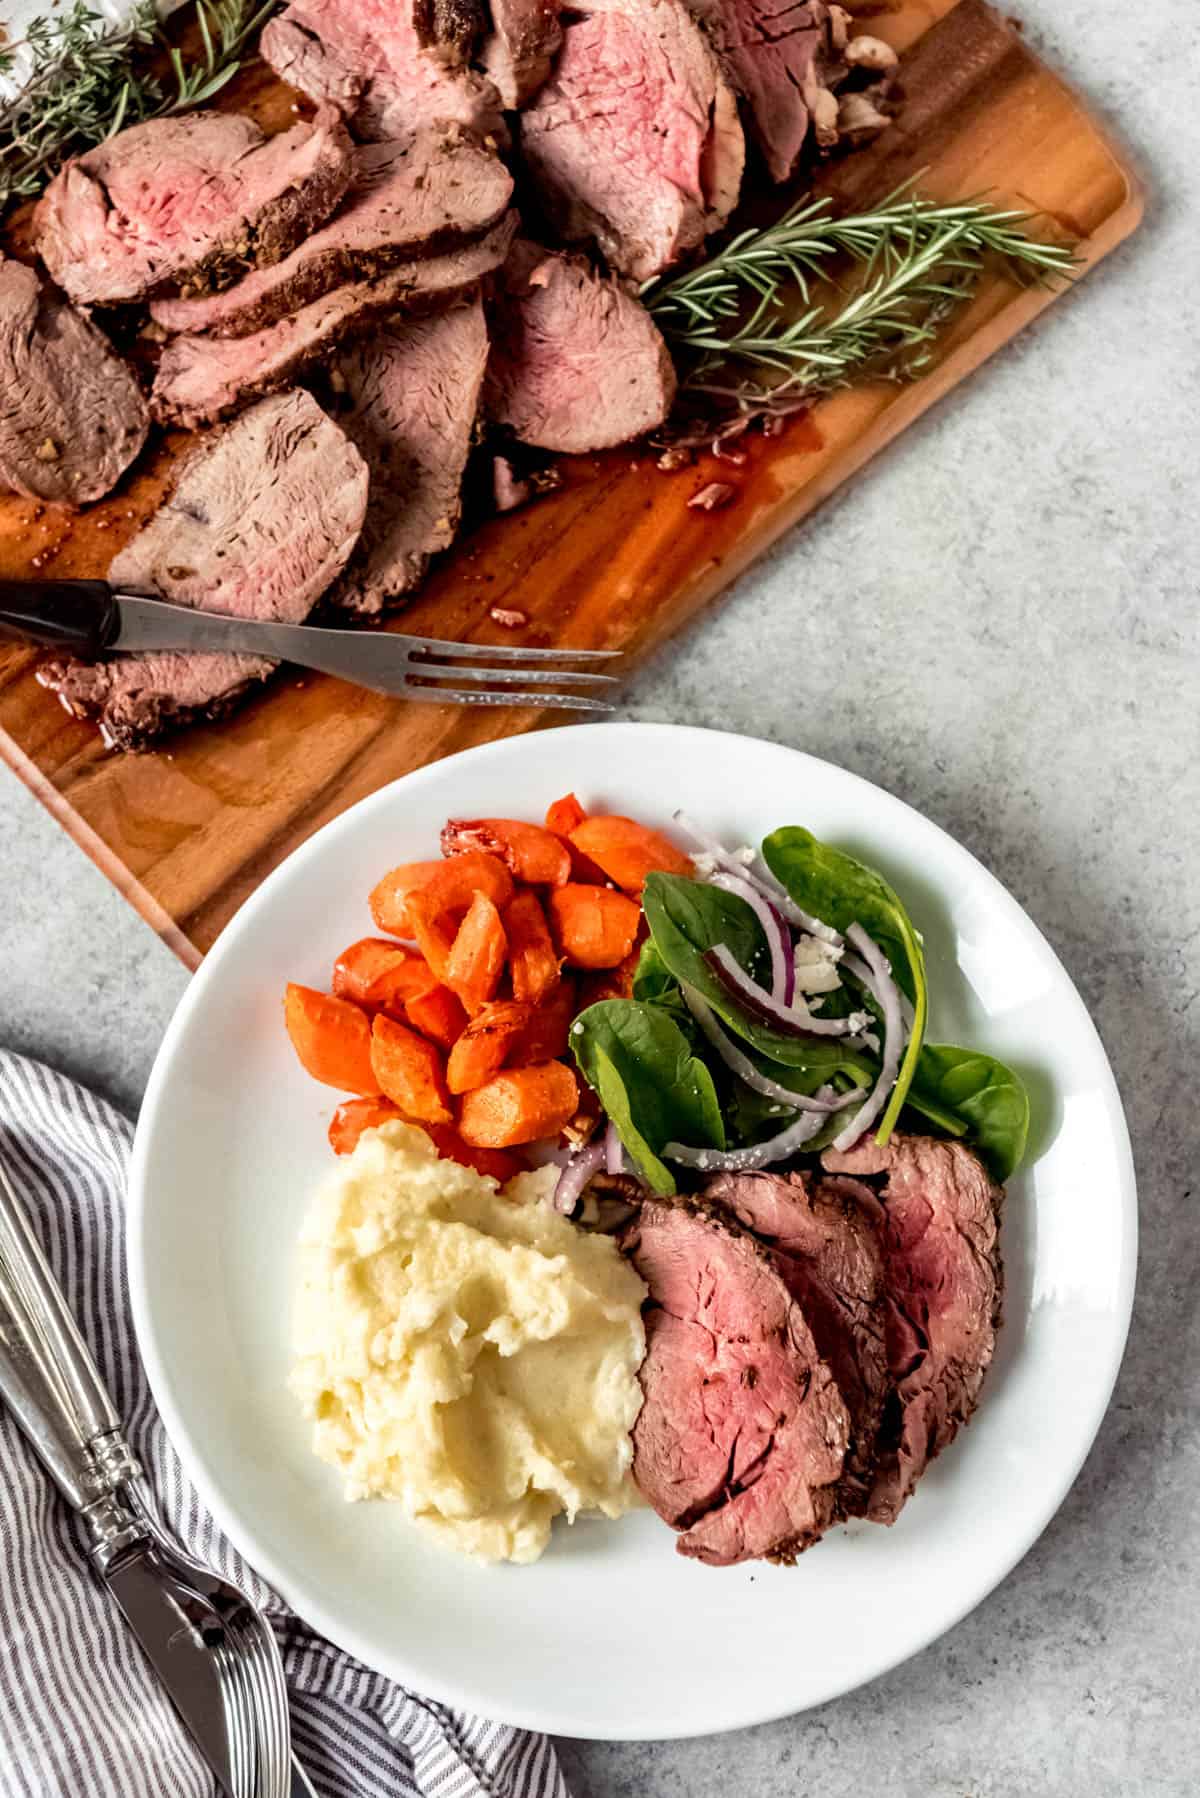 Top view of a plate of sliced beef tenderloin with creamy mashed potatoes, roasted carrots, and salad.